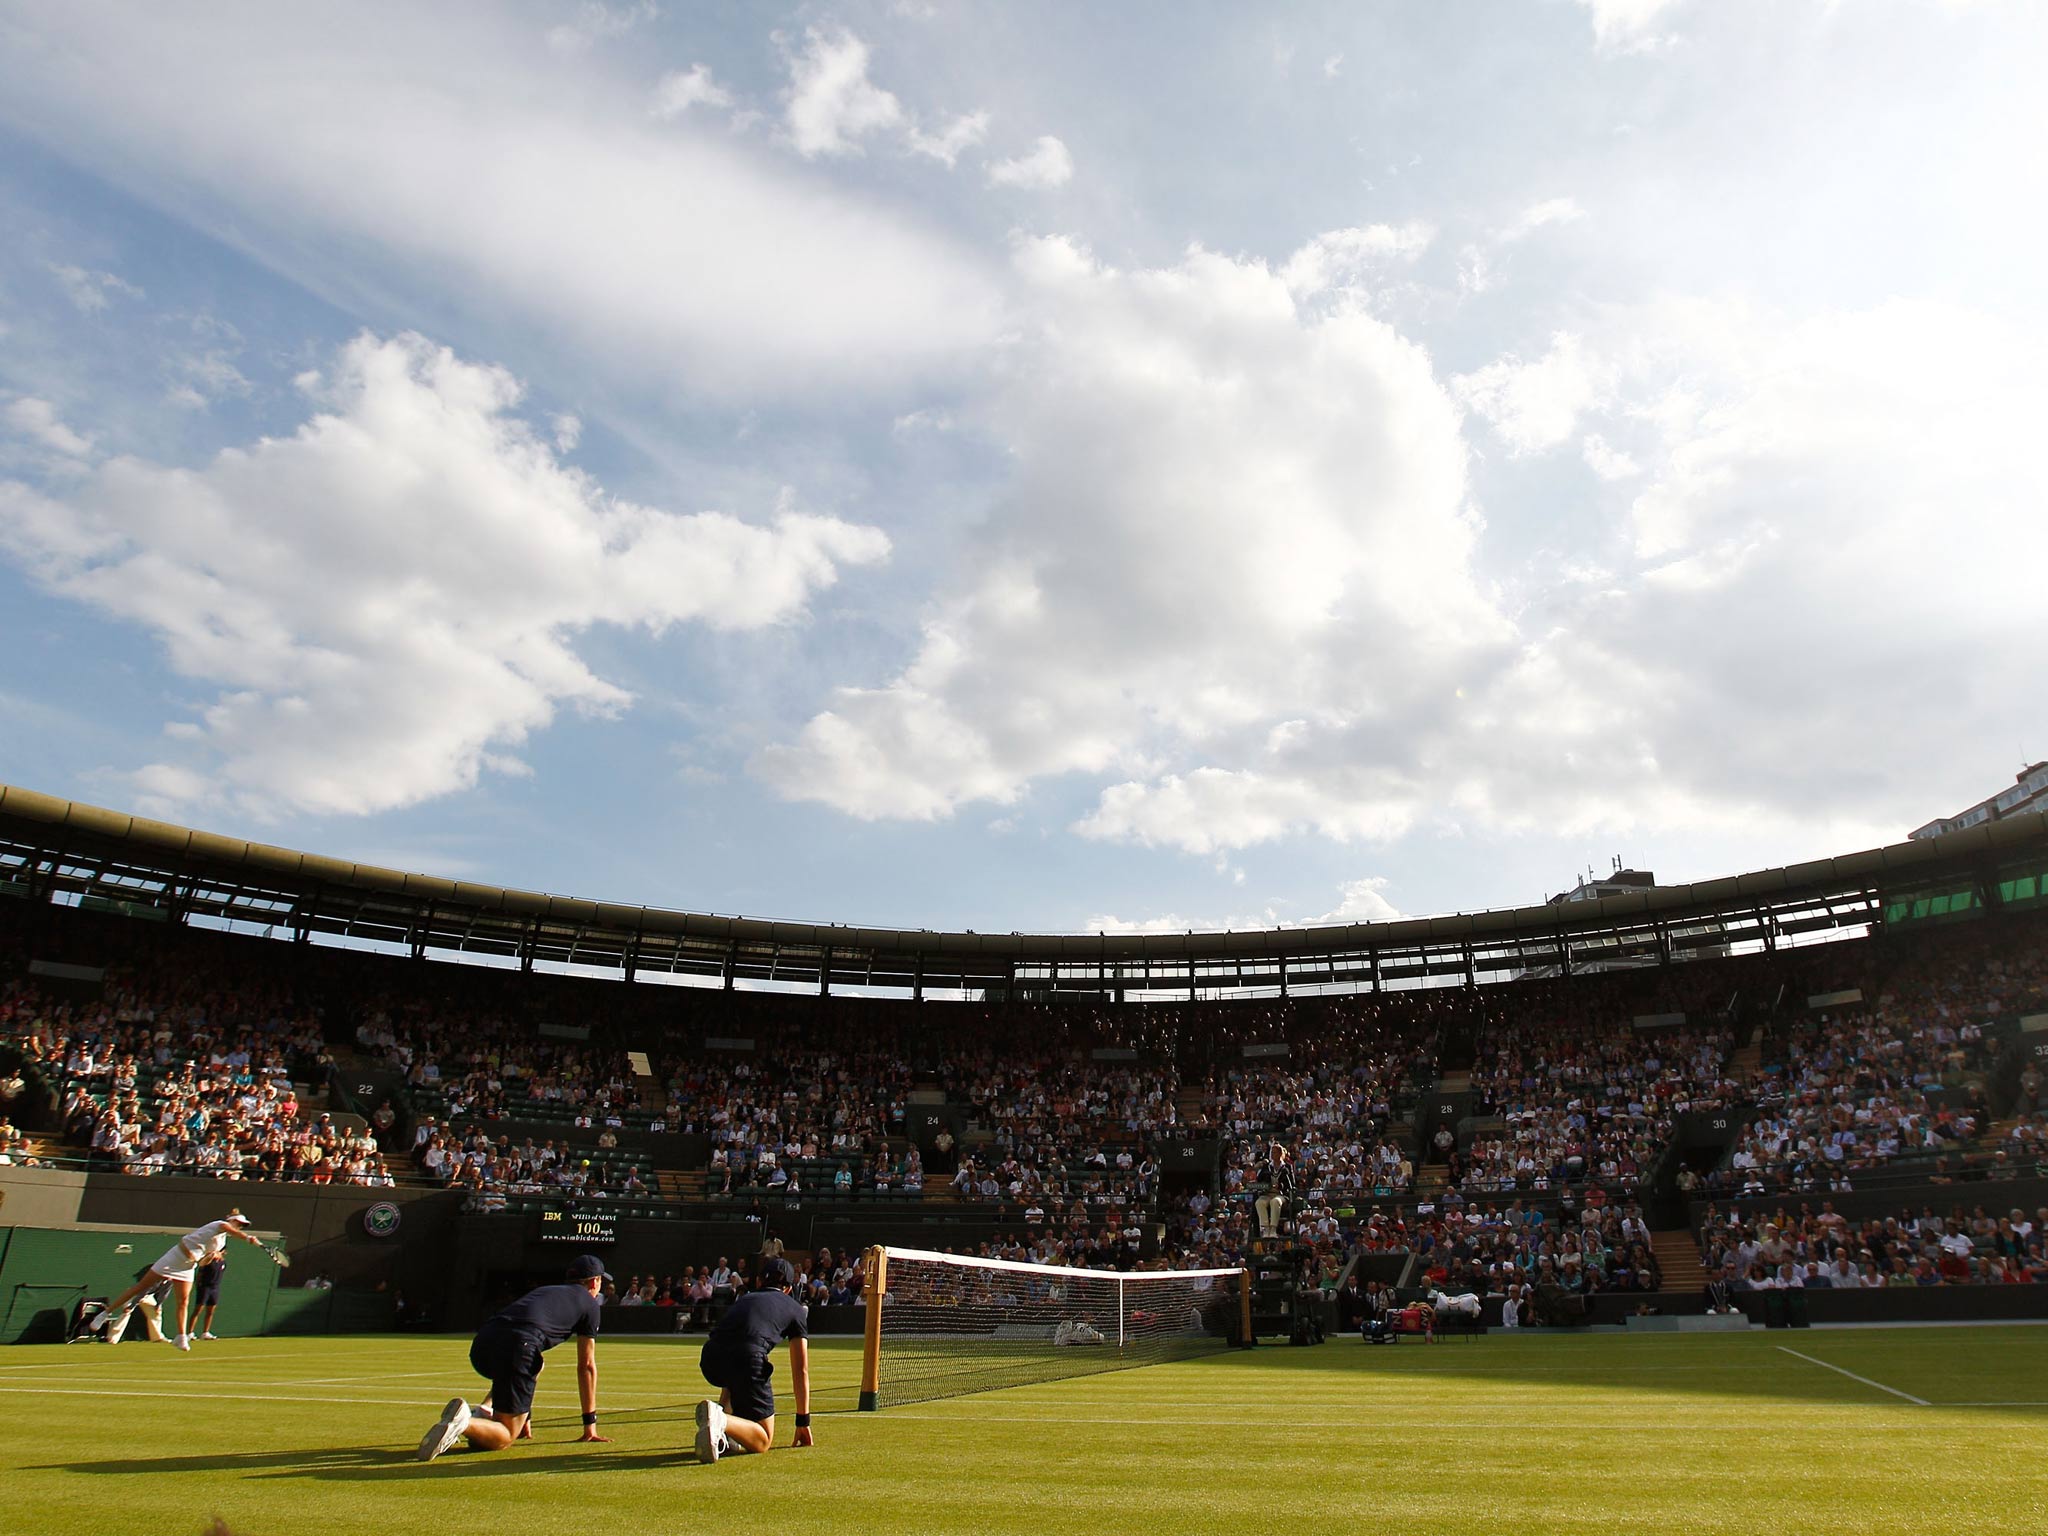 A view of Court One at Wimbledon